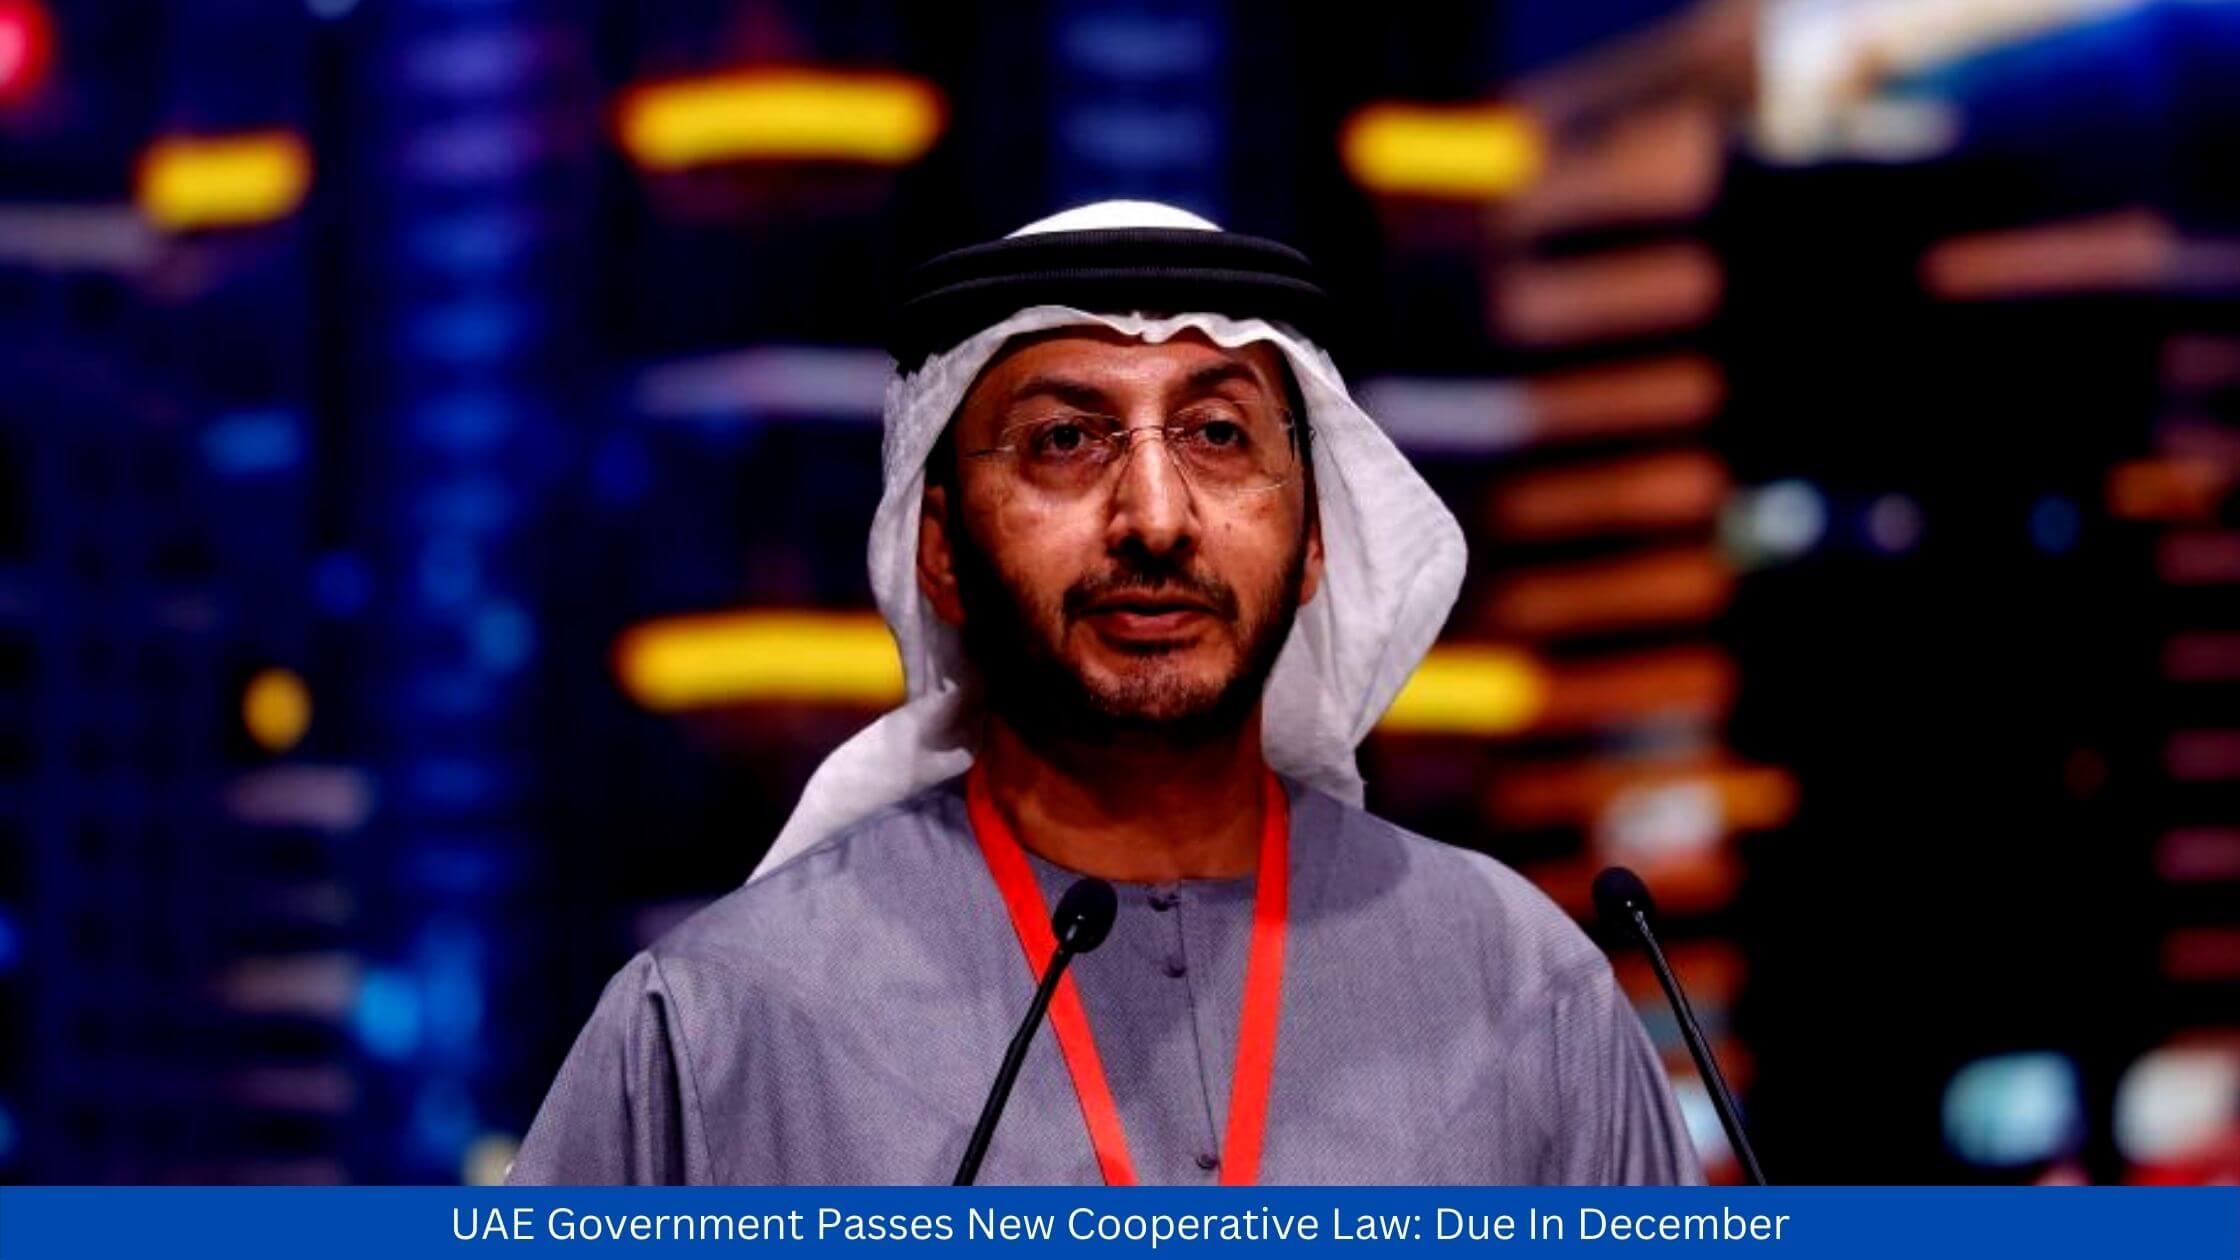 UAE Government Passes New Cooperative Law Due In December